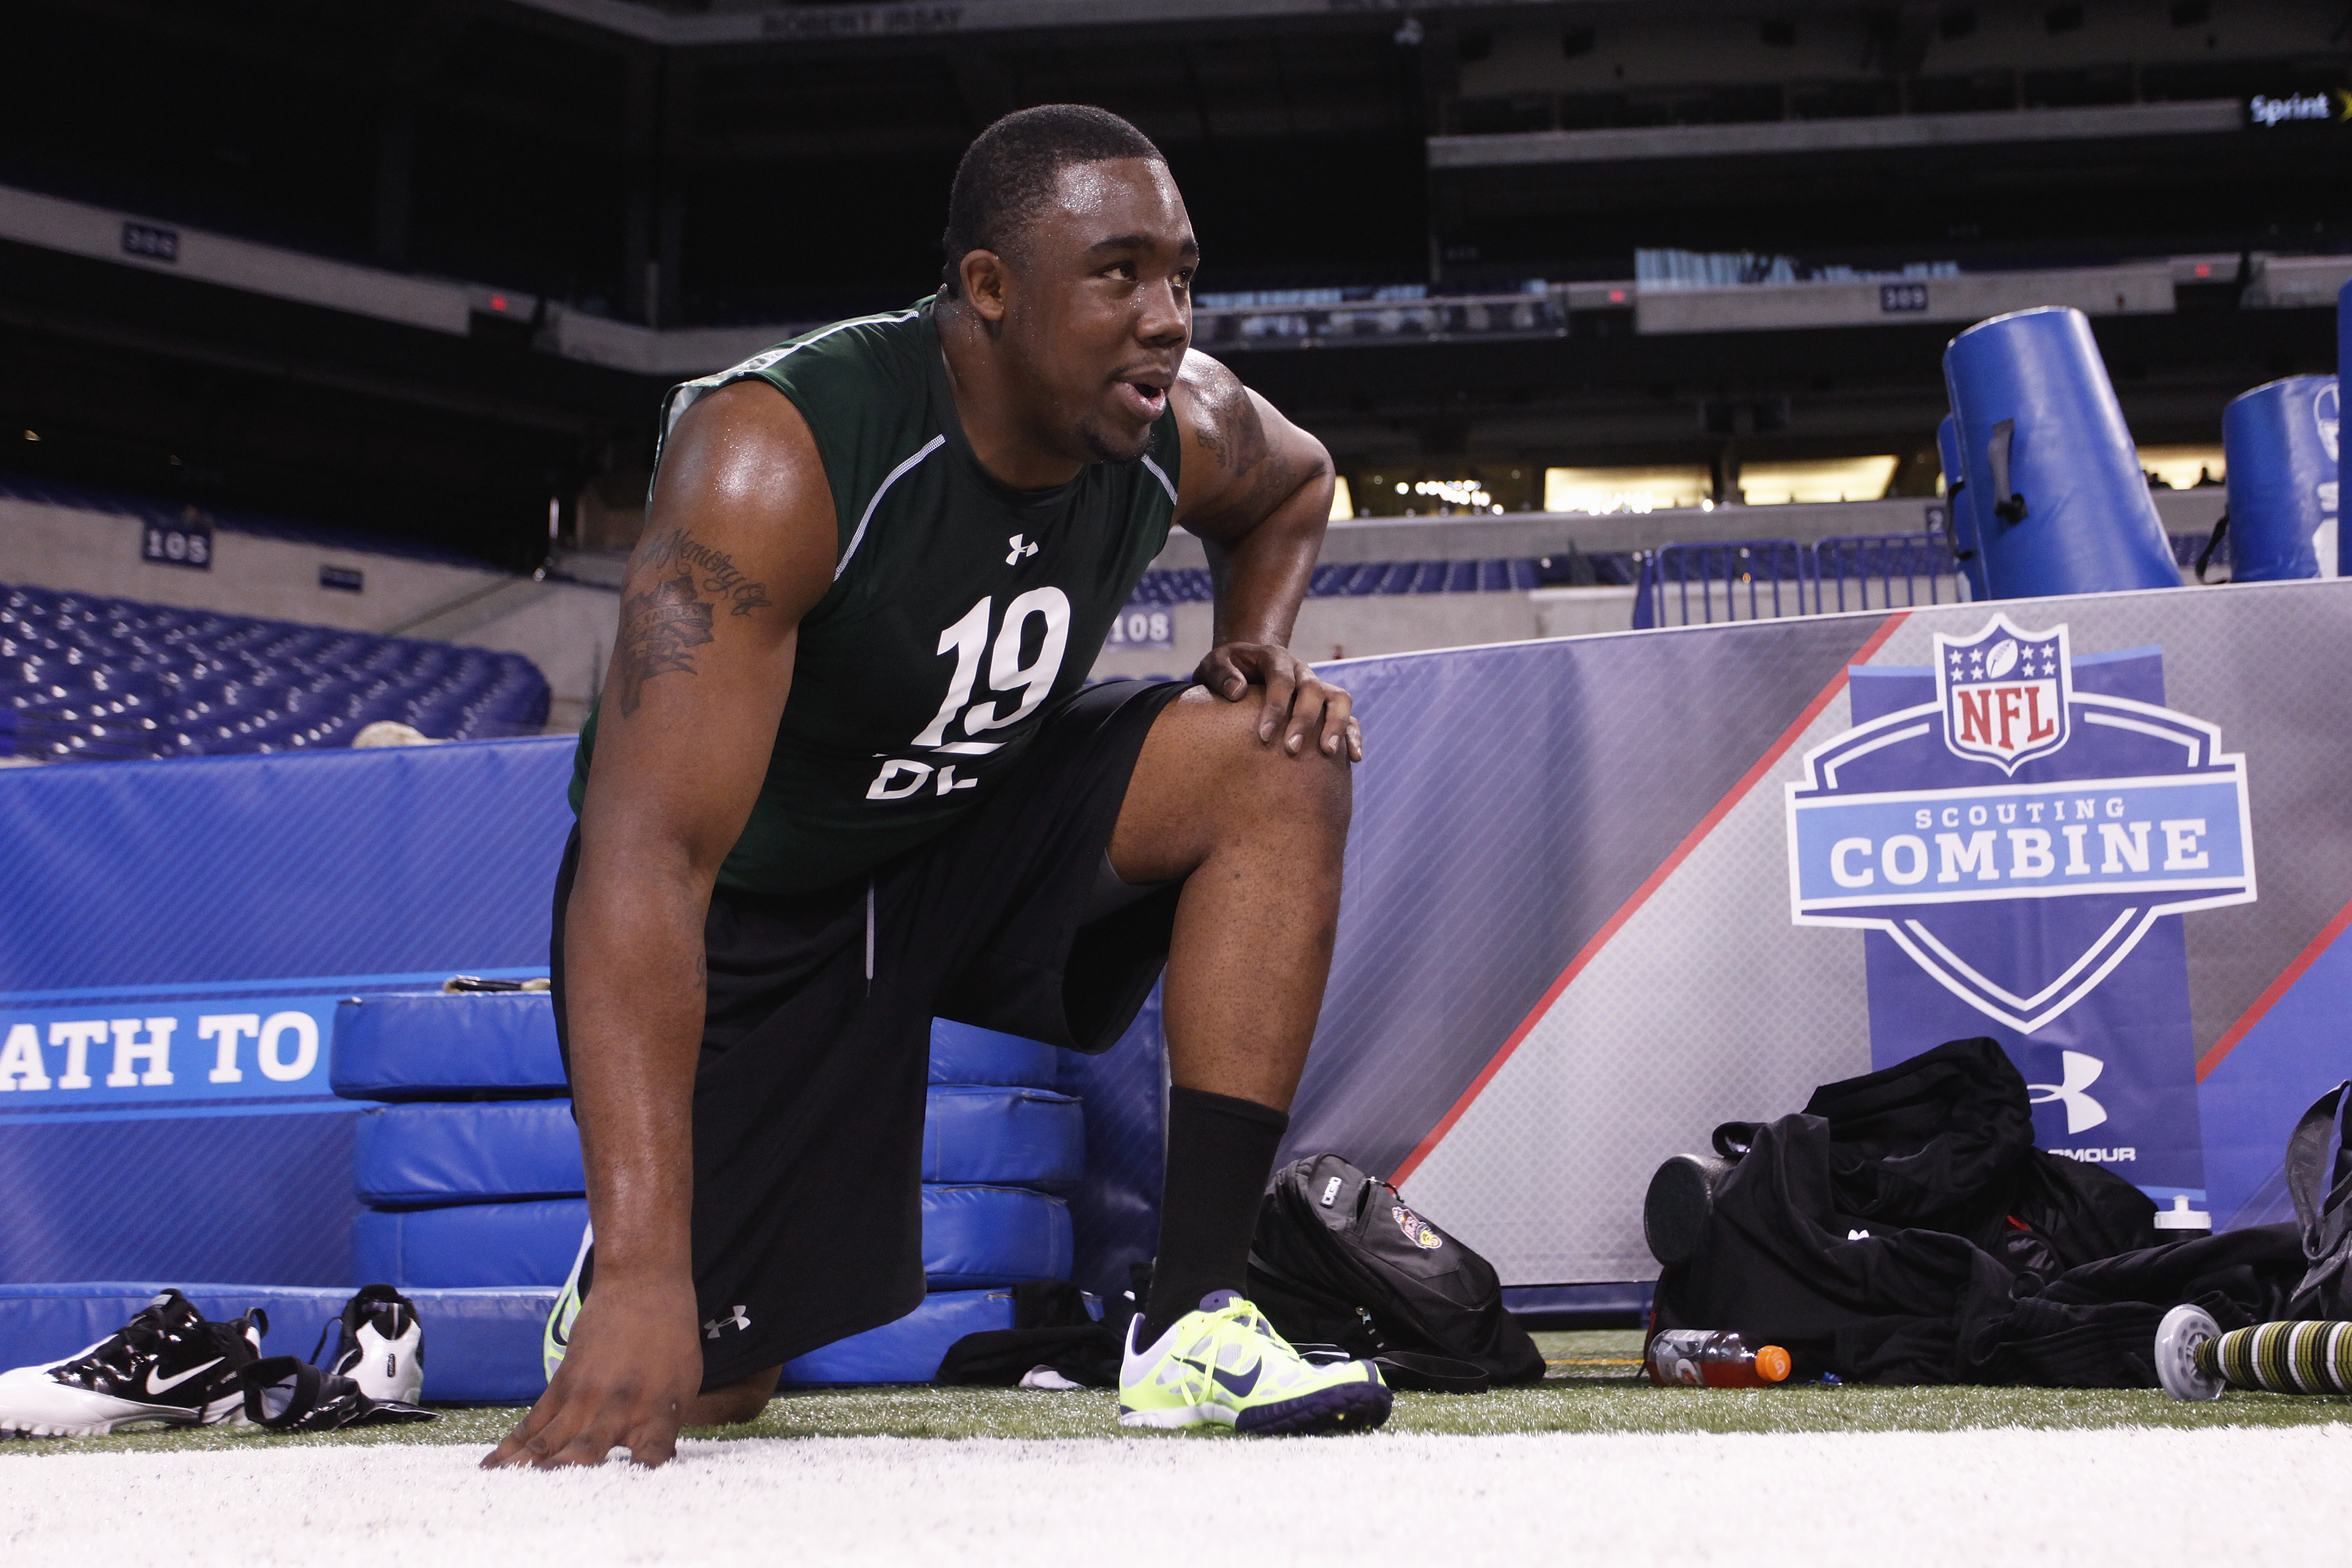 INDIANAPOLIS, IN - FEBRUARY 28:  Defensive lineman Nick Fairley of Auburn looks on during the 2011 NFL Scouting Combine at Lucas Oil Stadium on February 28, 2011 in Indianapolis, Indiana. (Photo by Joe Robbins/Getty Images)